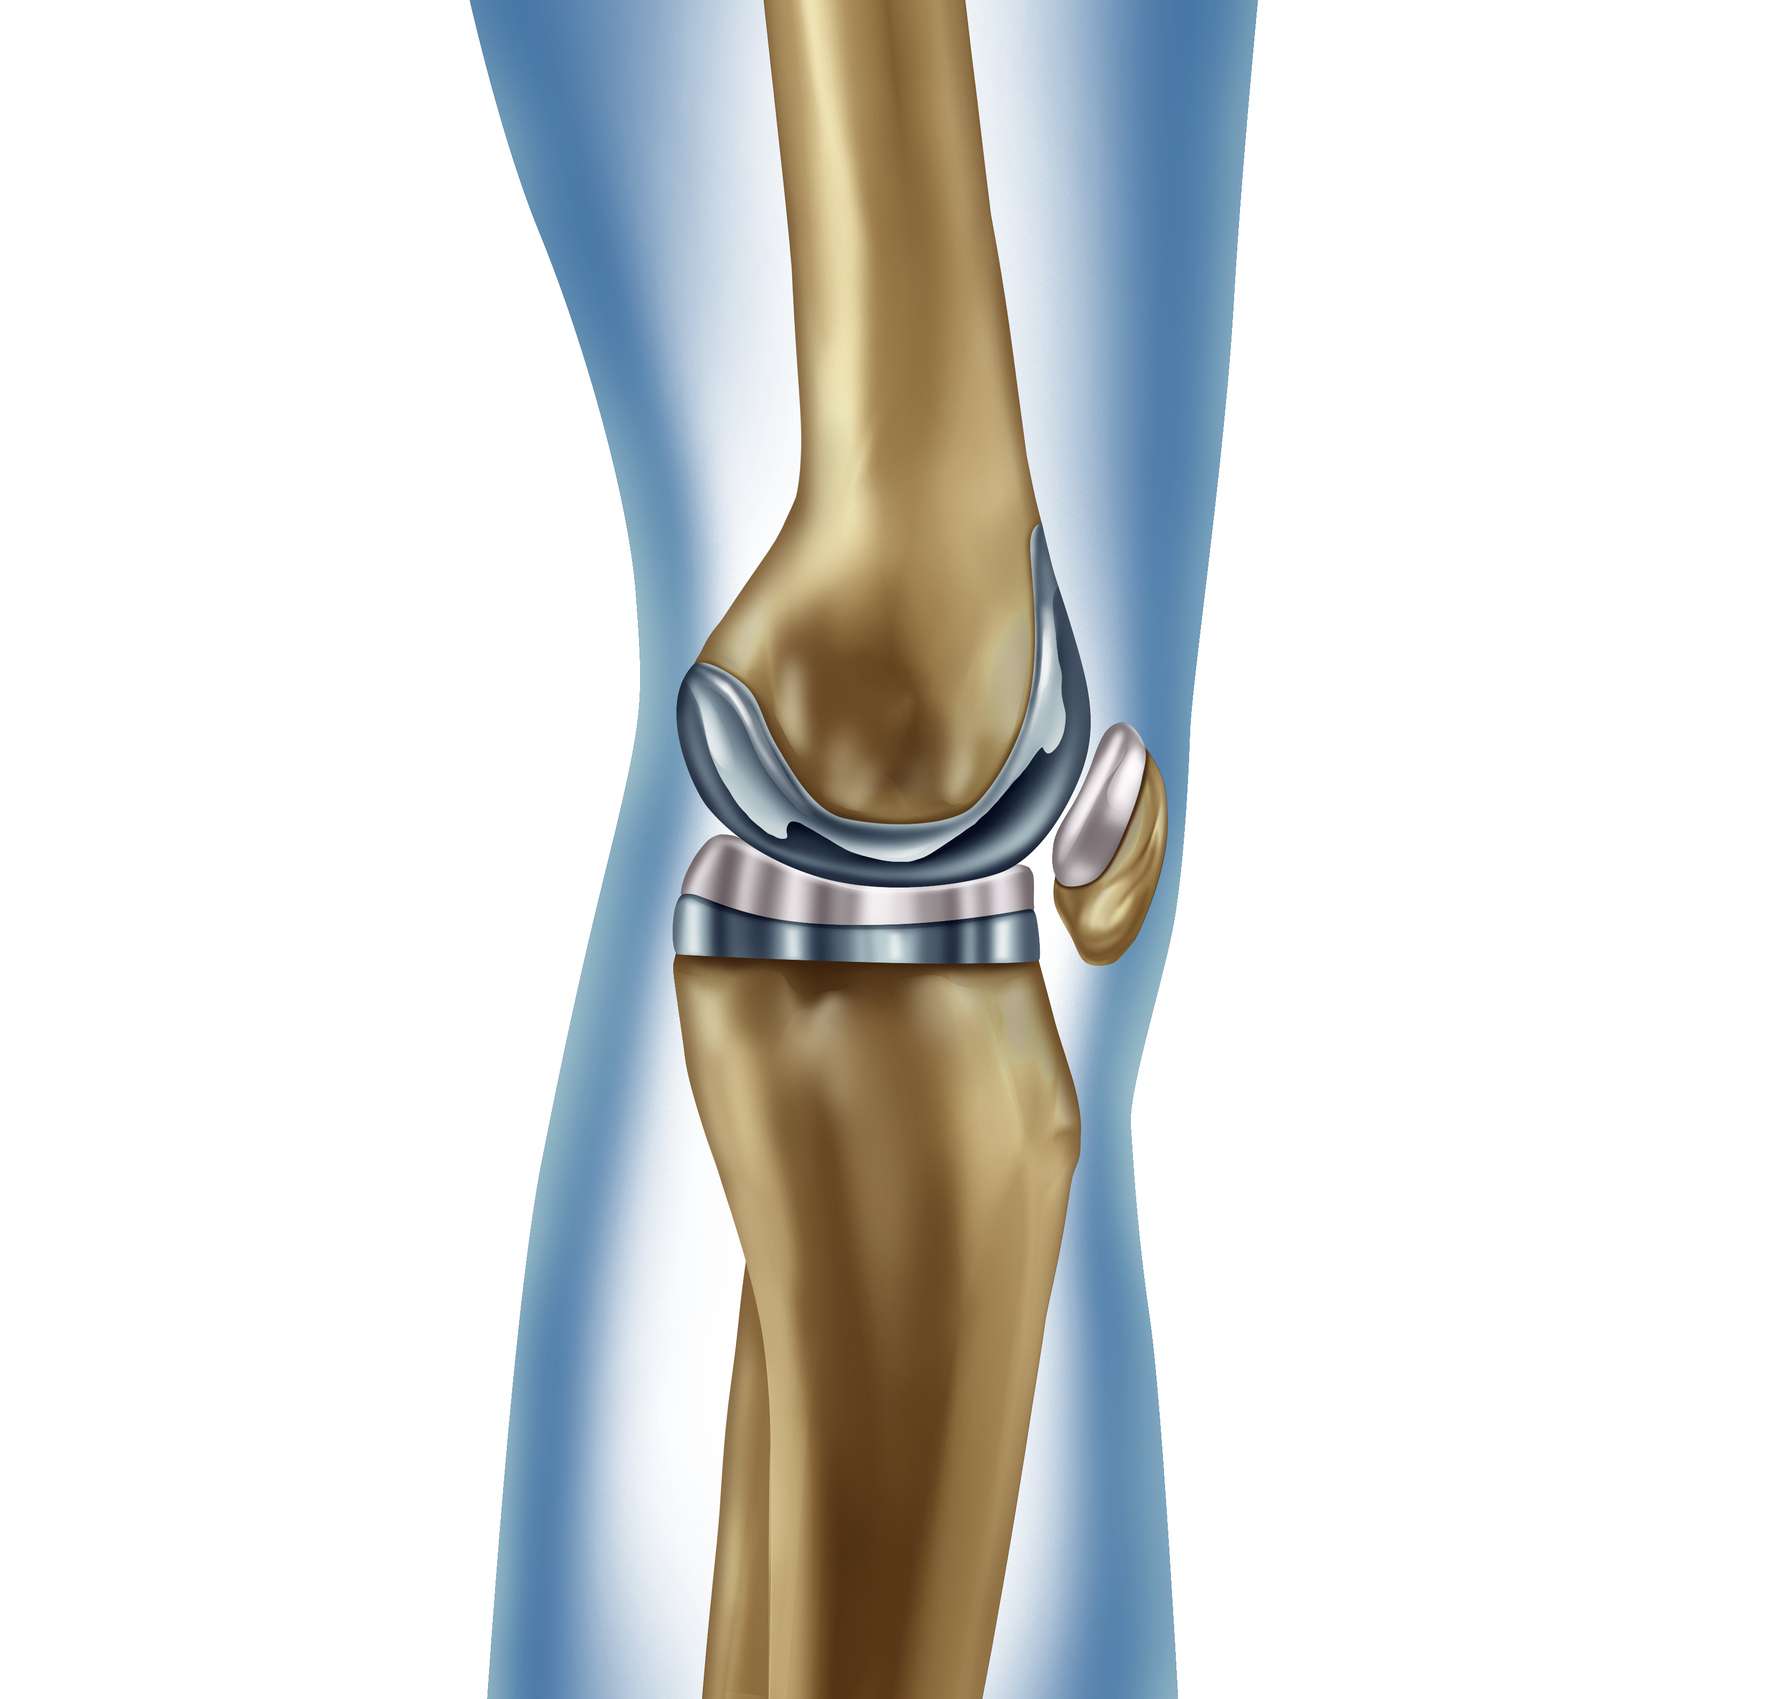 Do I Need a Full or Partial Knee Replacement Surgery?